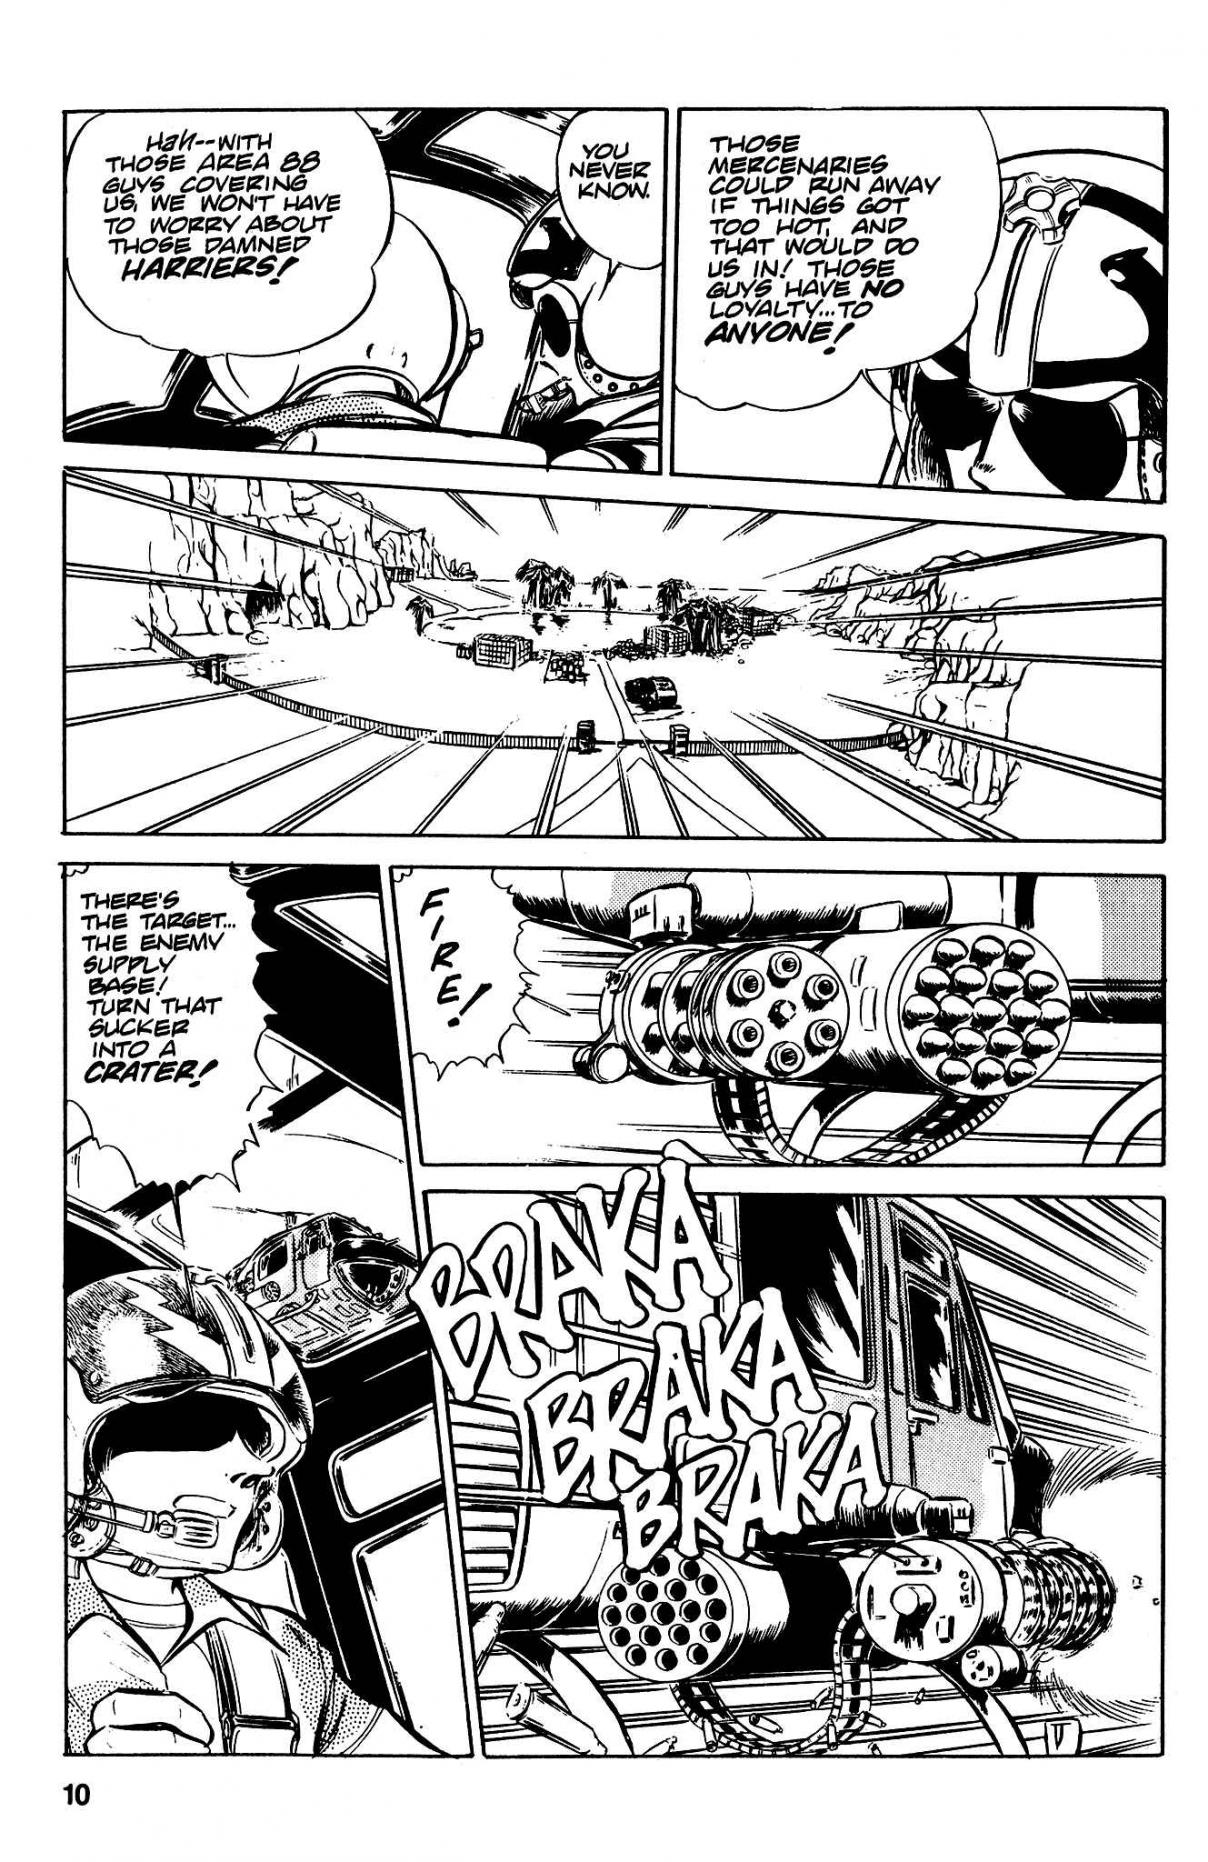 Area 88 Vol. 3 Ch. 31 The Passage to Hell